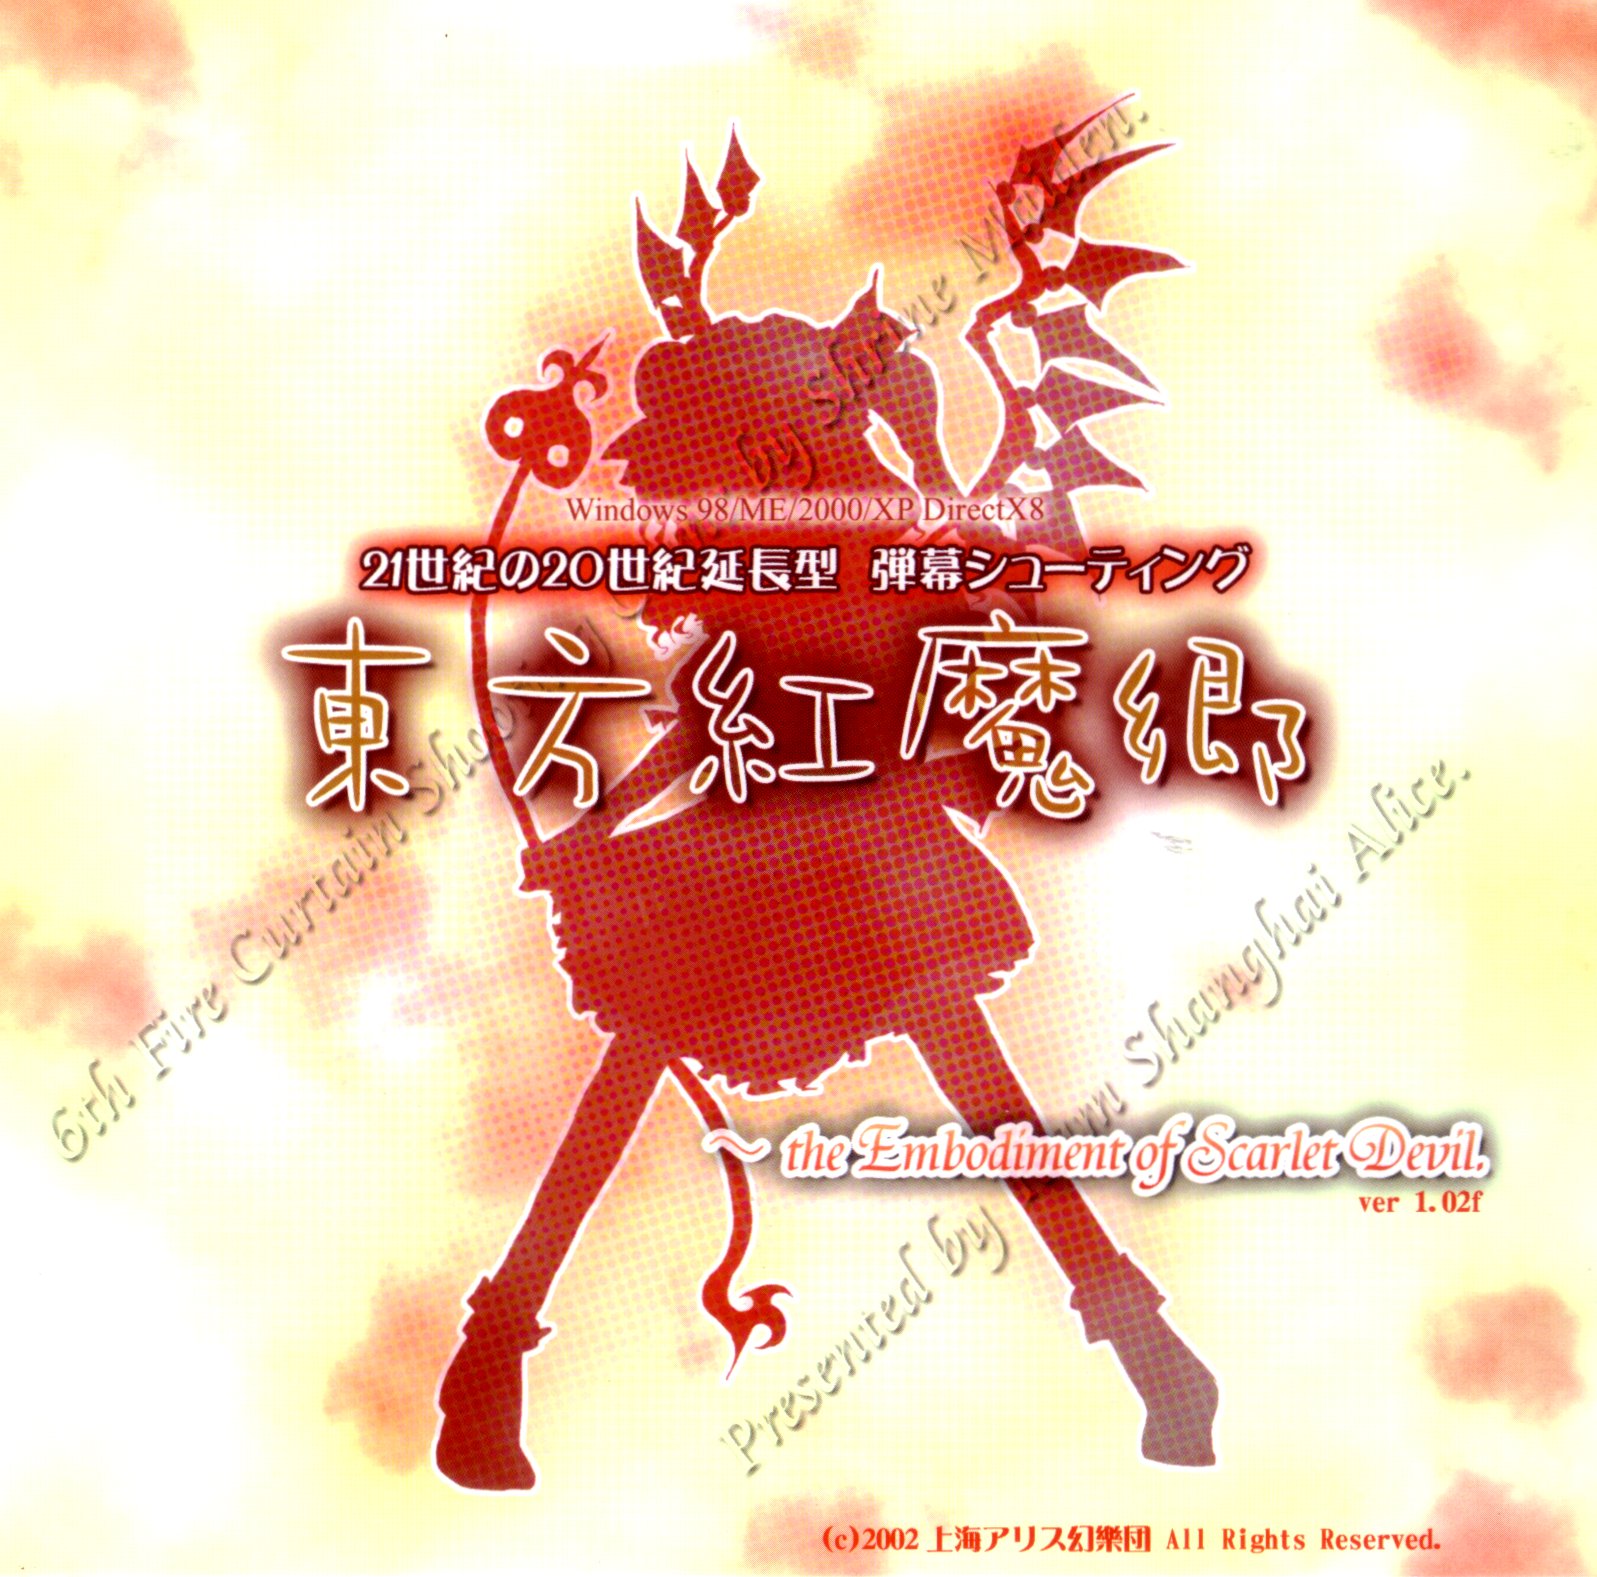 Touhou 6 The Embodiment of Scarlet Devil [PC]